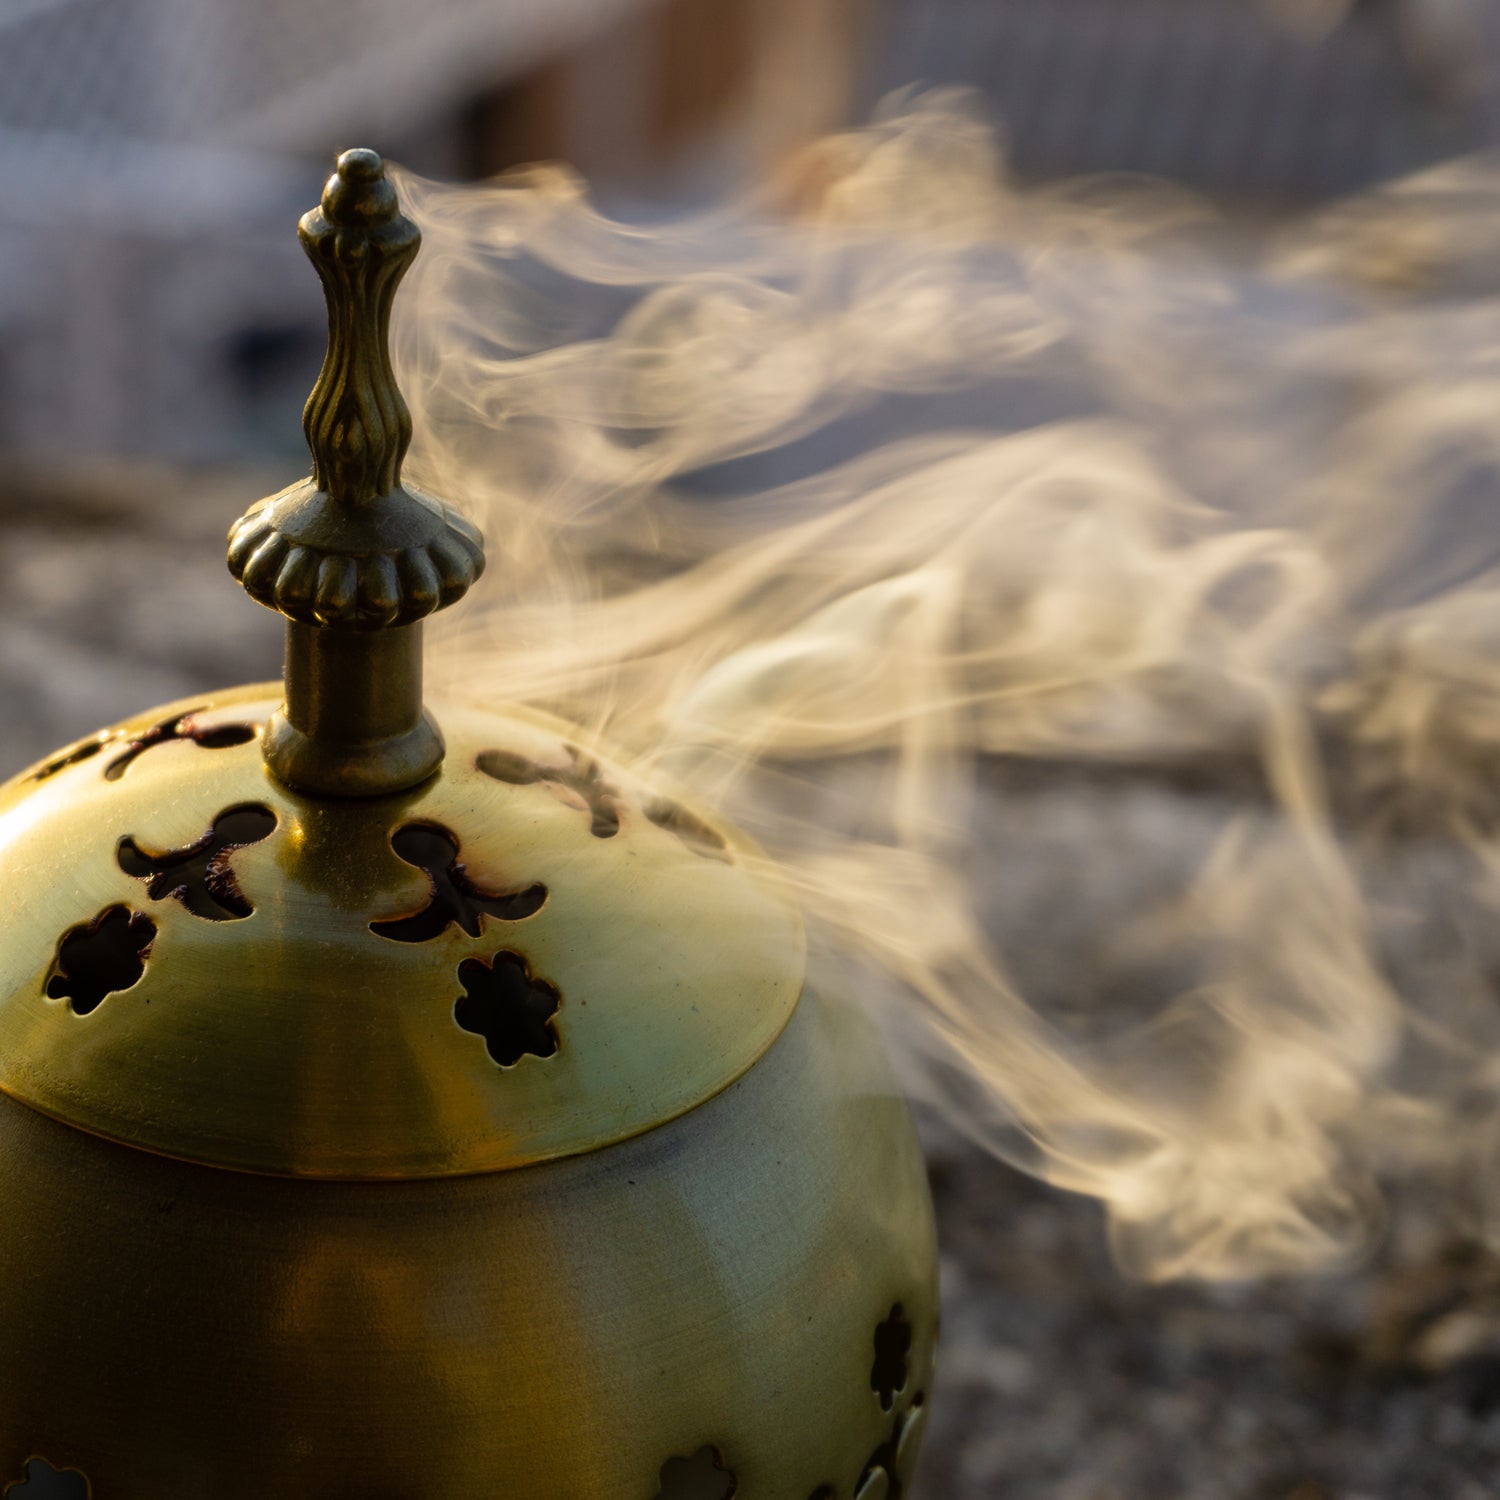 An incense burner filled with sandalwood - one of the fragrance inspirations for the "Bronzed Fireside" scented candle from Tuscany Candle